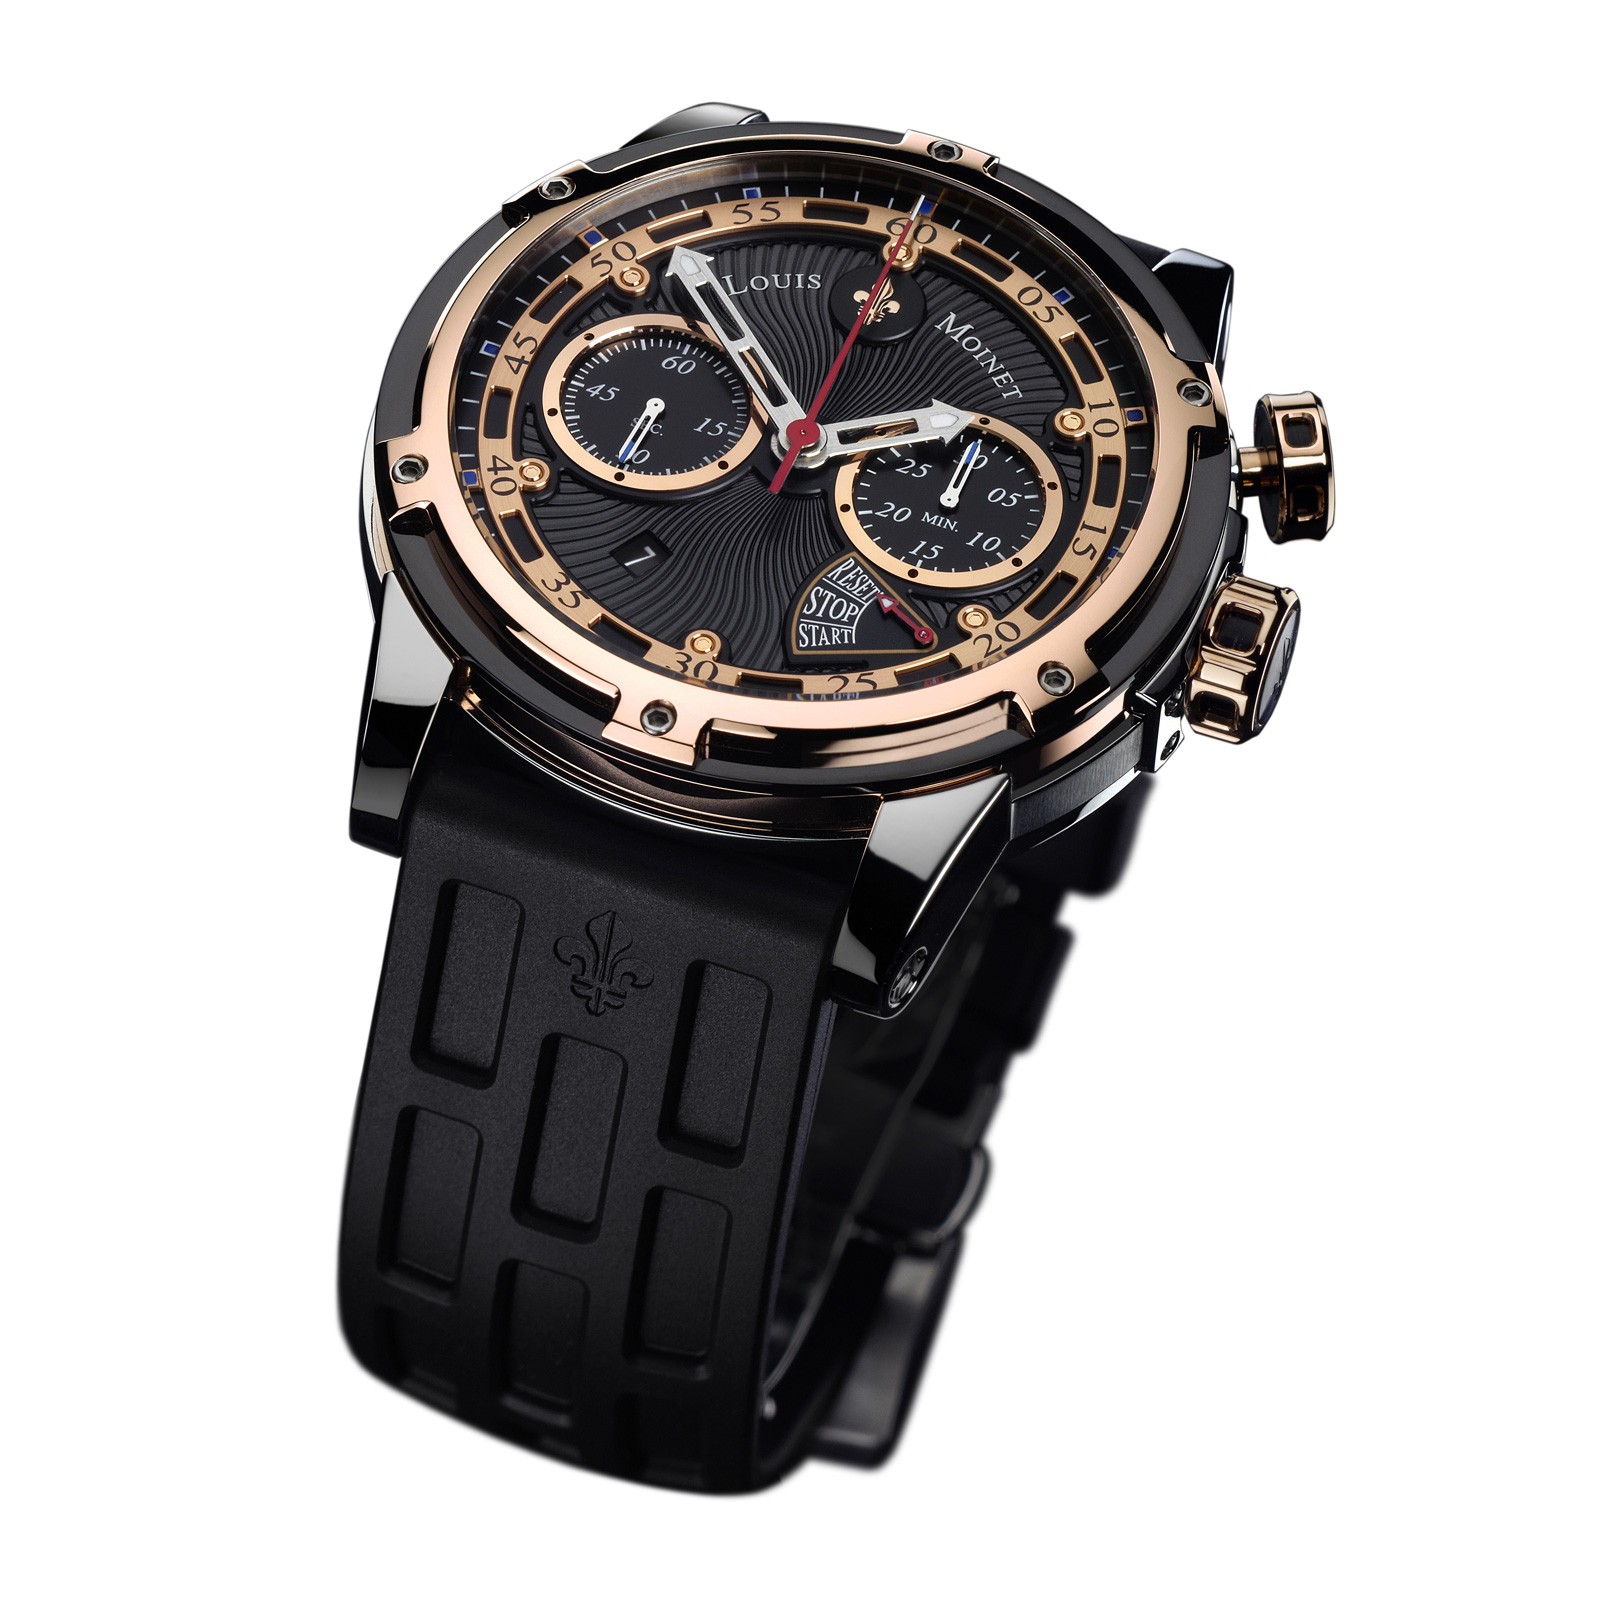 Louis Moinet Jules Verne Instrument III Rose Gold Watch - Perfect Swiss Watch | High Quality ...